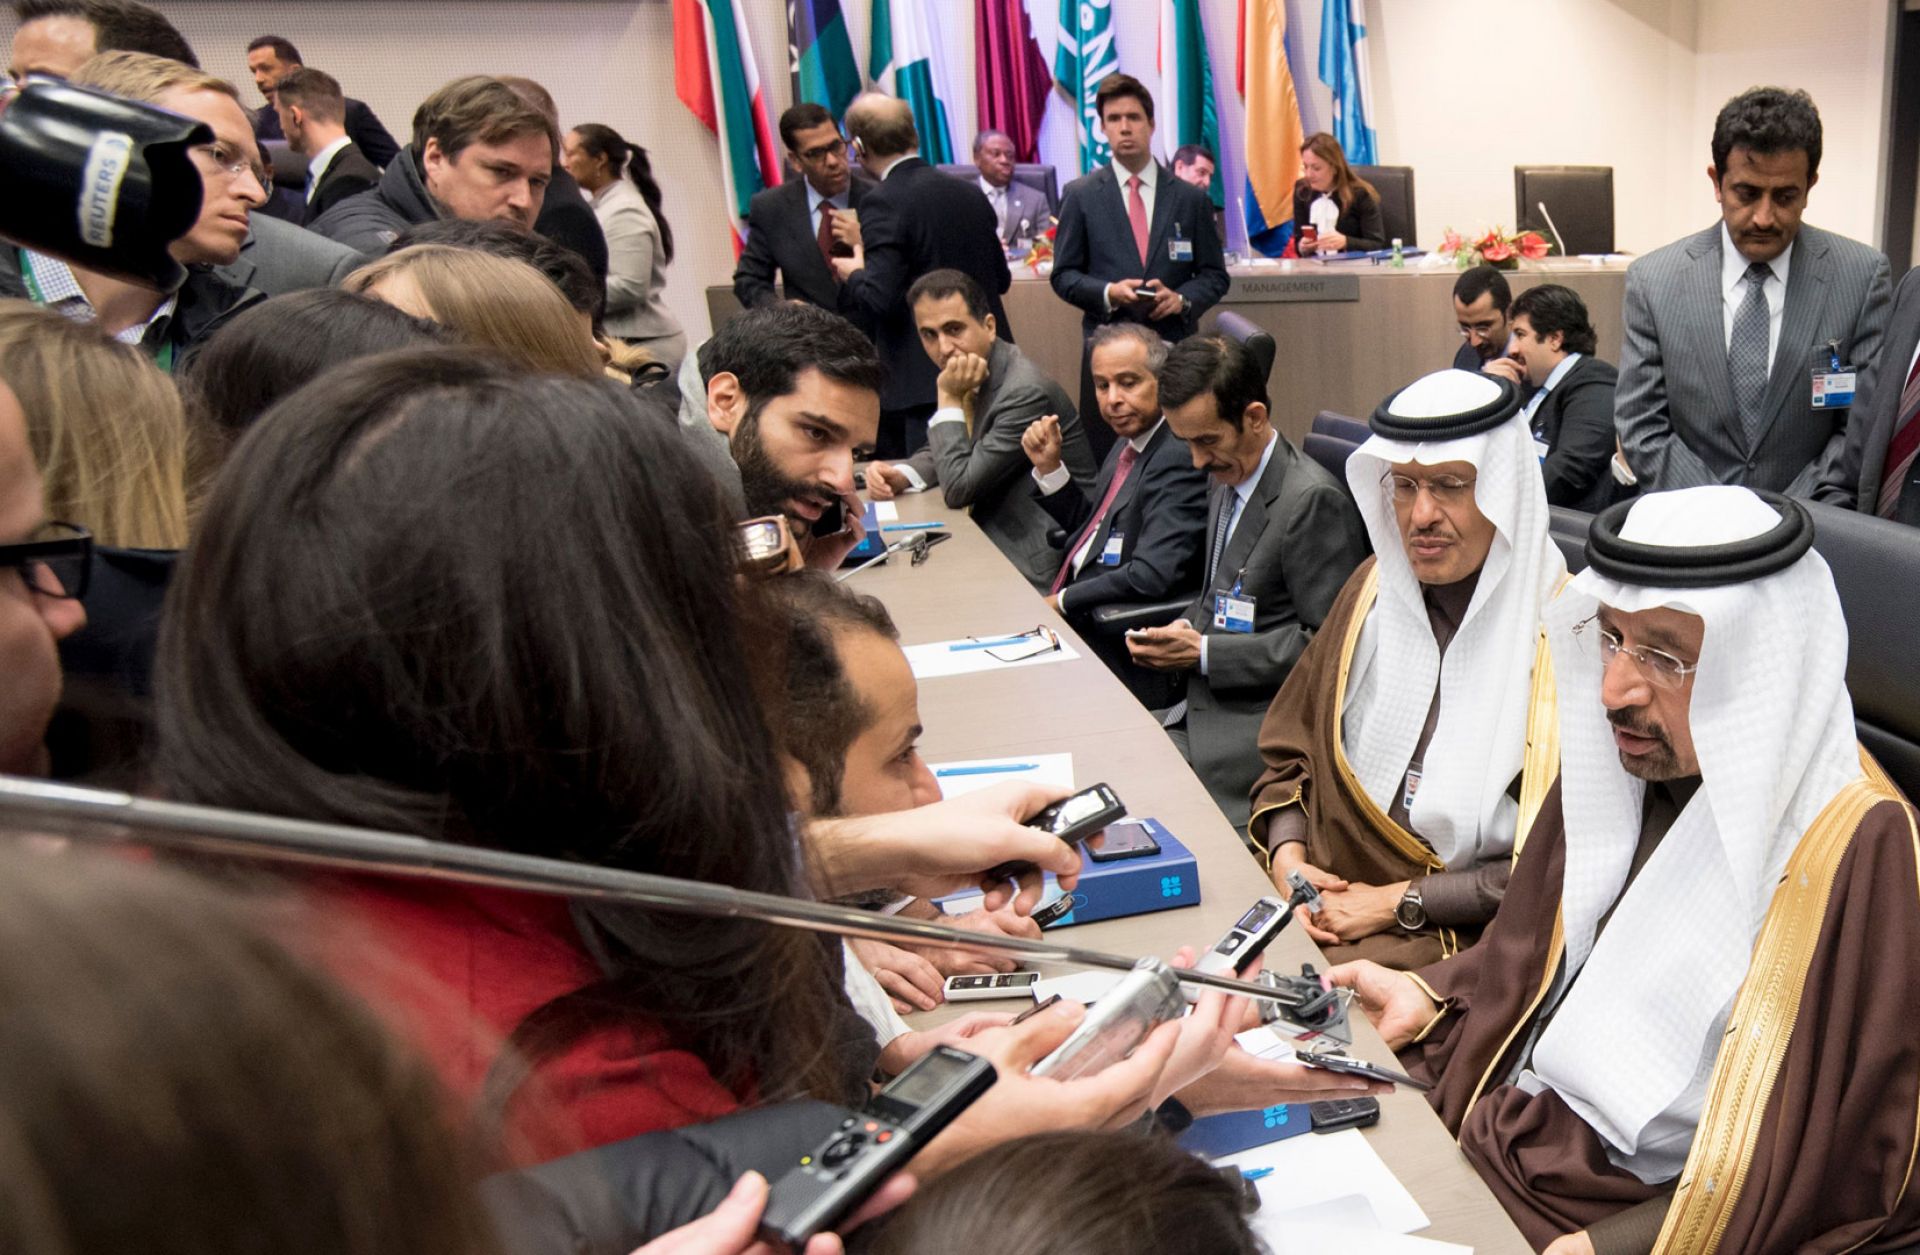 On Nov. 30, OPEC members agreed to a long-awaited deal to slash oil production.